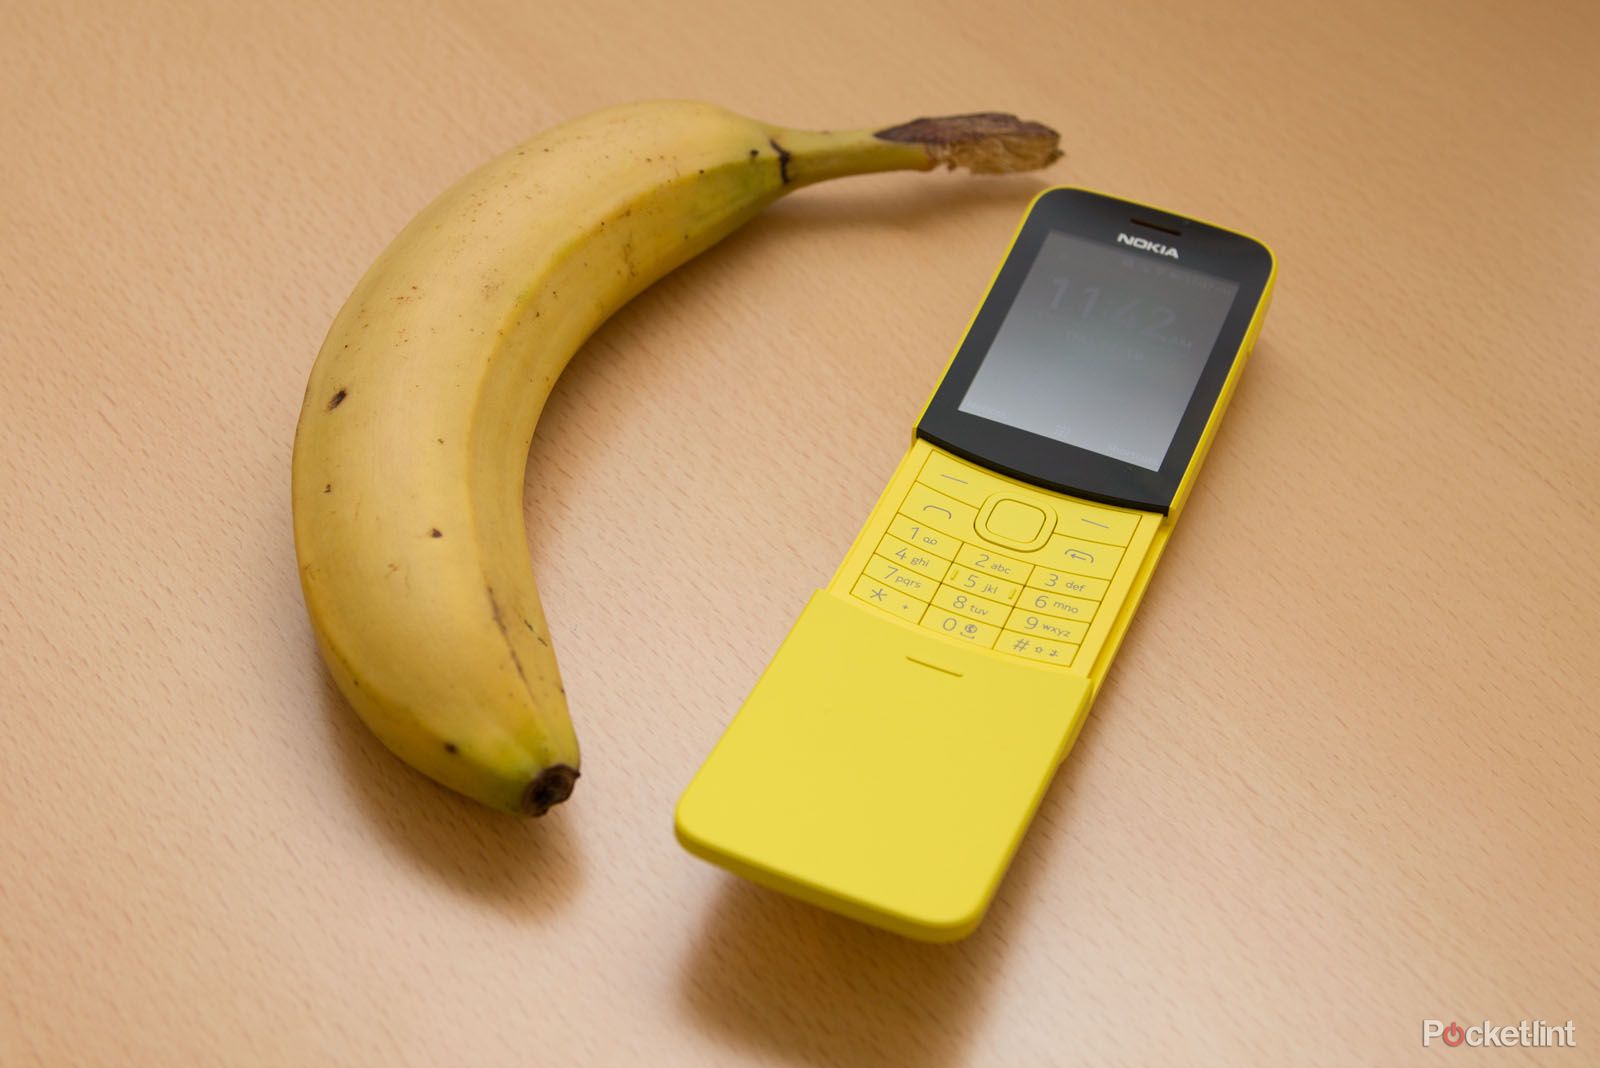 Nokia 8110 4G banana phone now on pre-order relive the 90s image 1